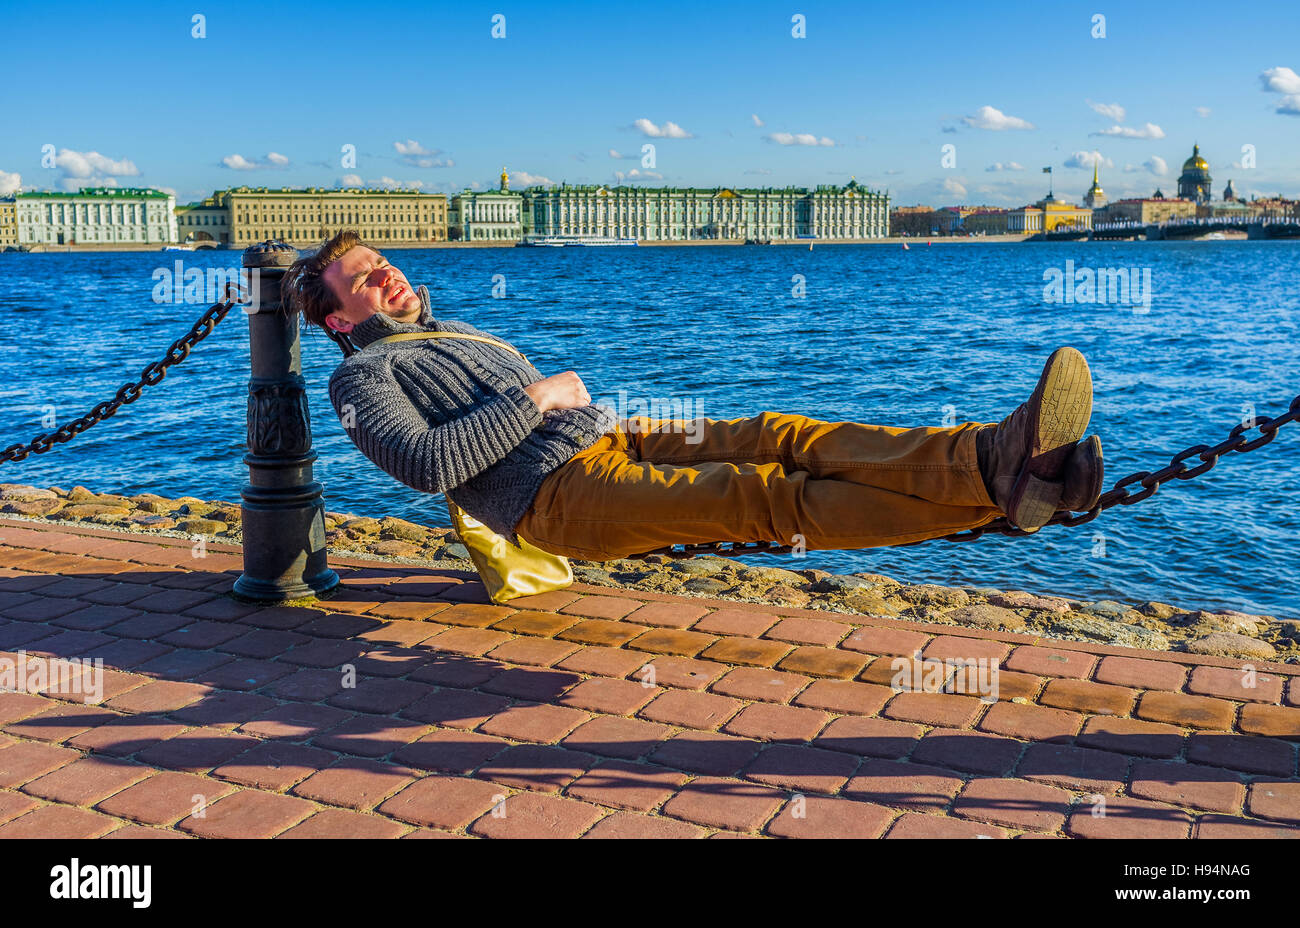 SAINT PETERSBURG - APRIL 24, 2015: The best way to take a sunbathe without a sunbed is to lie on chains on the embankment of the river, on April 24 in Stock Photo